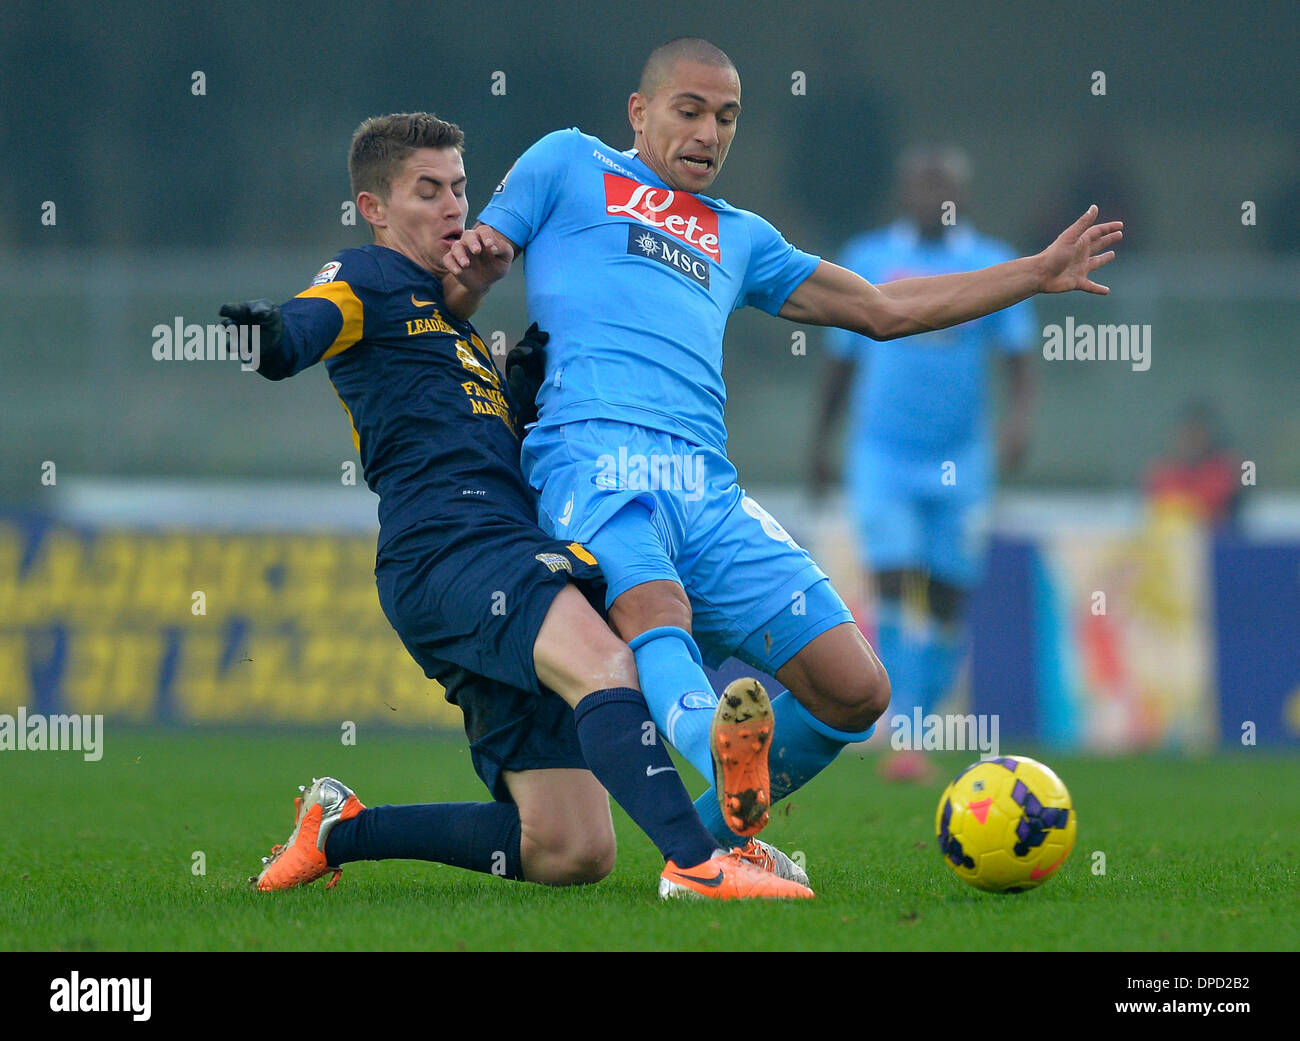 Verona, Italy. 12th Jan, 2014. Naples' Gokhan Inler (R) competes during the Serie A football match Hellas Verona vs SSC Napoli in Verona, Italy, on Jan. 12, 2014. SSC Napoli won 3-0. Credit:  Alberto Lingria/Xinhua/Alamy Live News Stock Photo